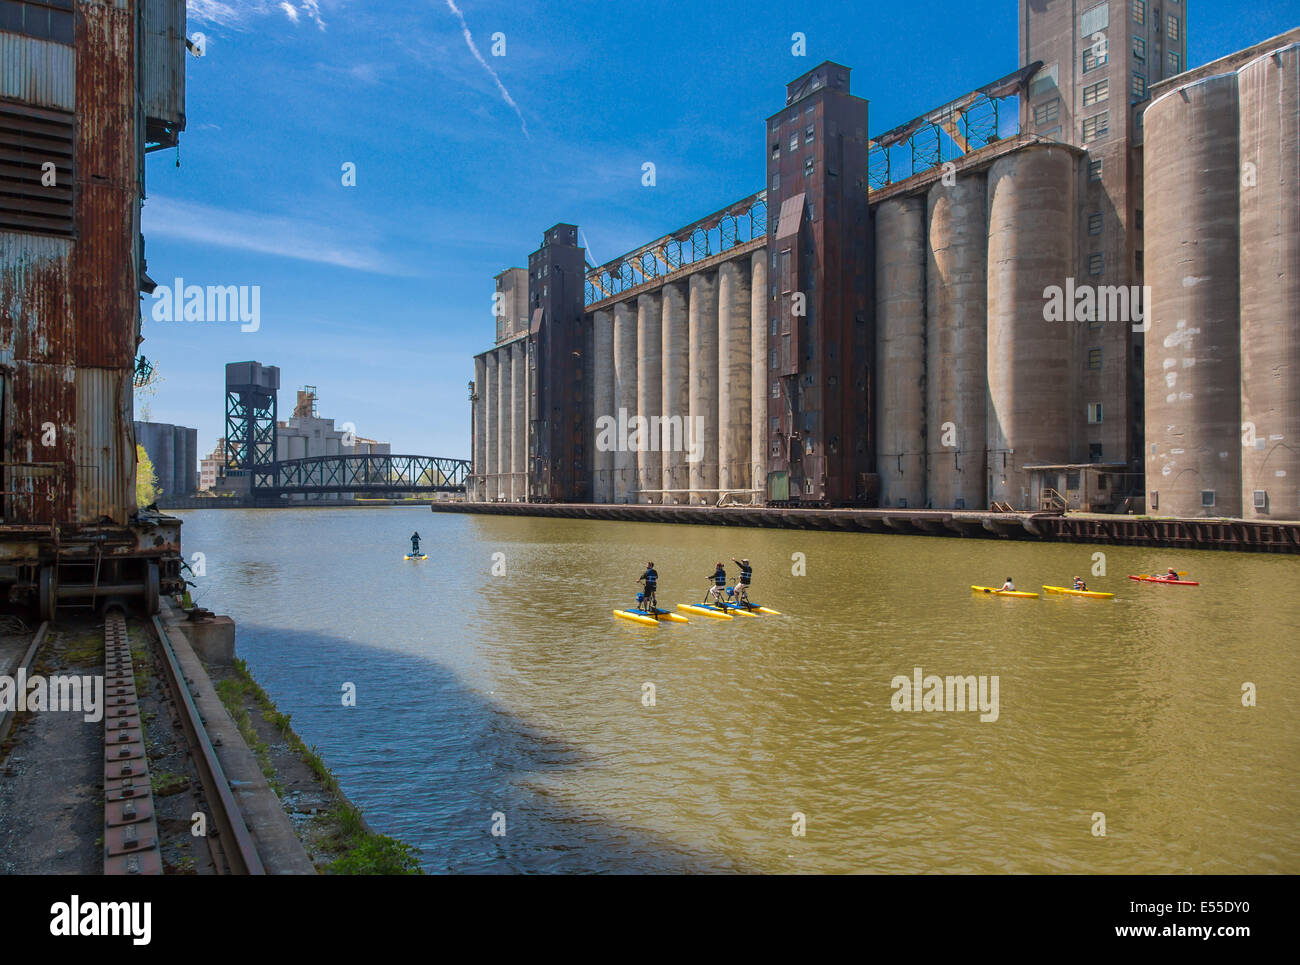 Paddleboarding and kayaking in the Buffalo River along historic abandoned grain elevators on the waterfront in Buffalo, New York Stock Photo